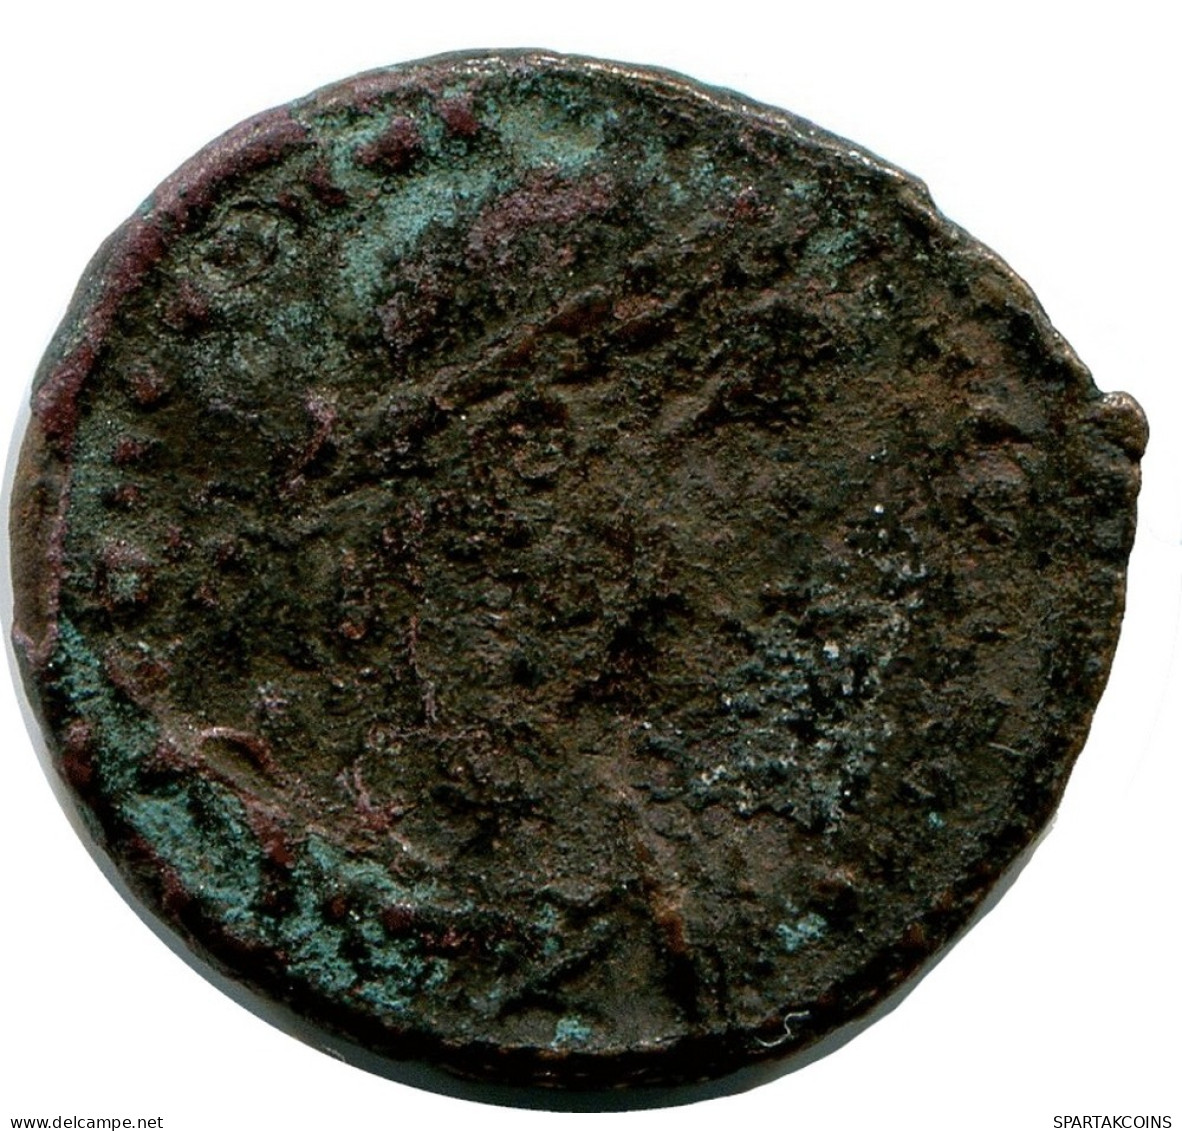 ROMAN Coin MINTED IN ALEKSANDRIA FROM THE ROYAL ONTARIO MUSEUM #ANC10173.14.D.A - El Imperio Christiano (307 / 363)